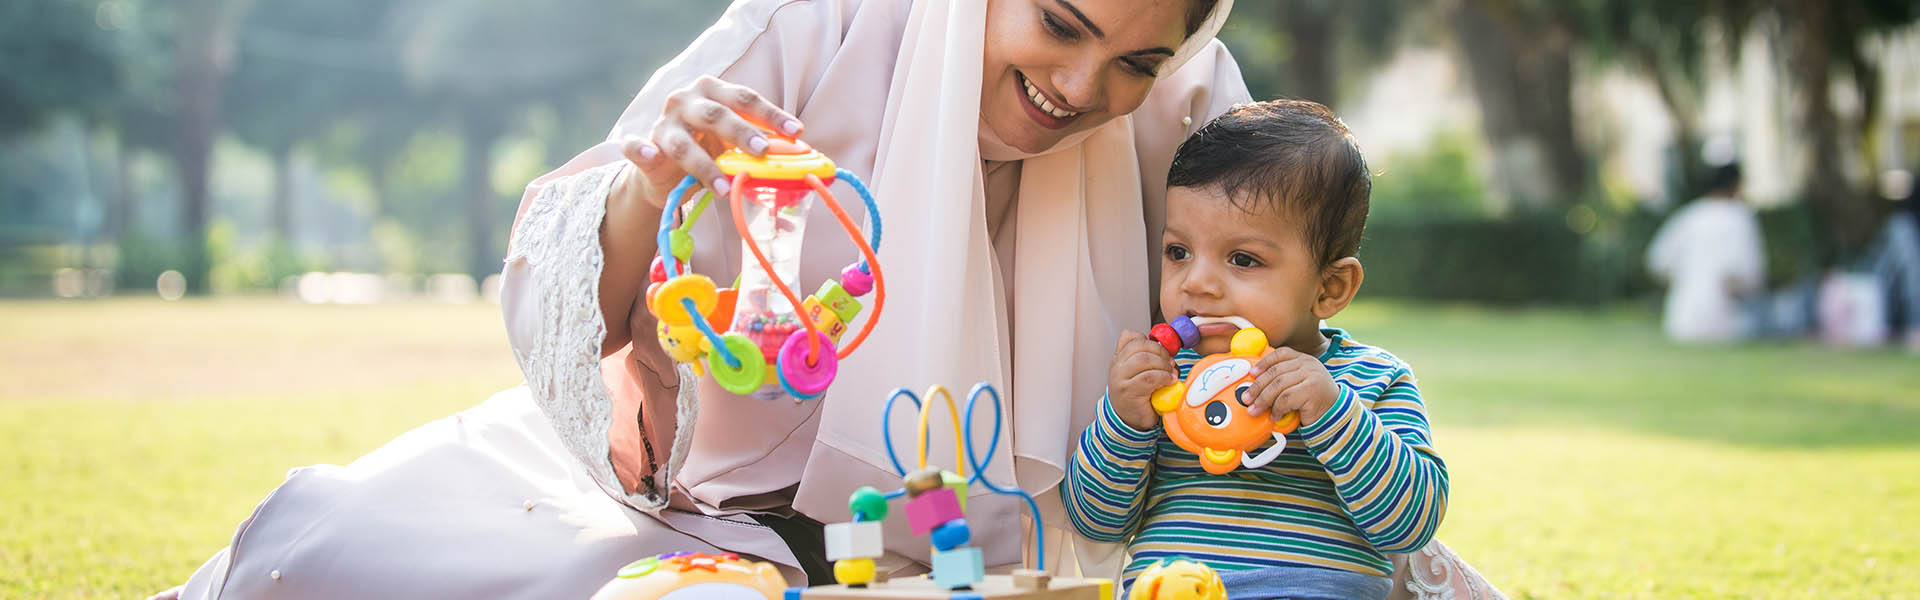 Mother in hijab with infant, playing with toys in the park